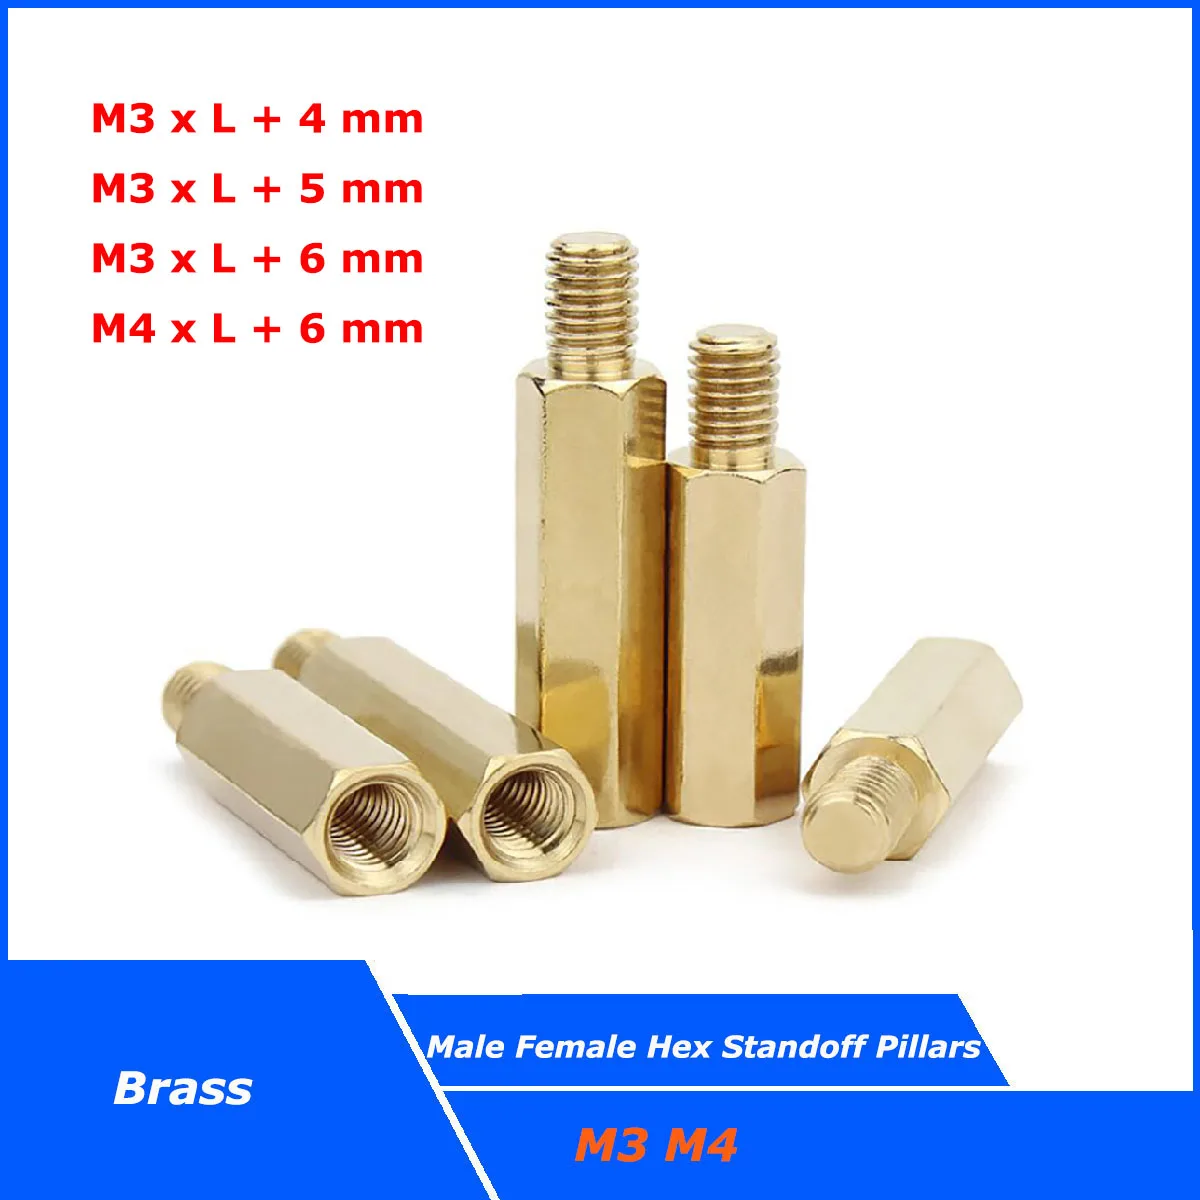 

M3 M4 Hex Male to Female Brass Standoff Pillars PCB Computer PC Motherboard Hexagonal Spacers Screw Stud